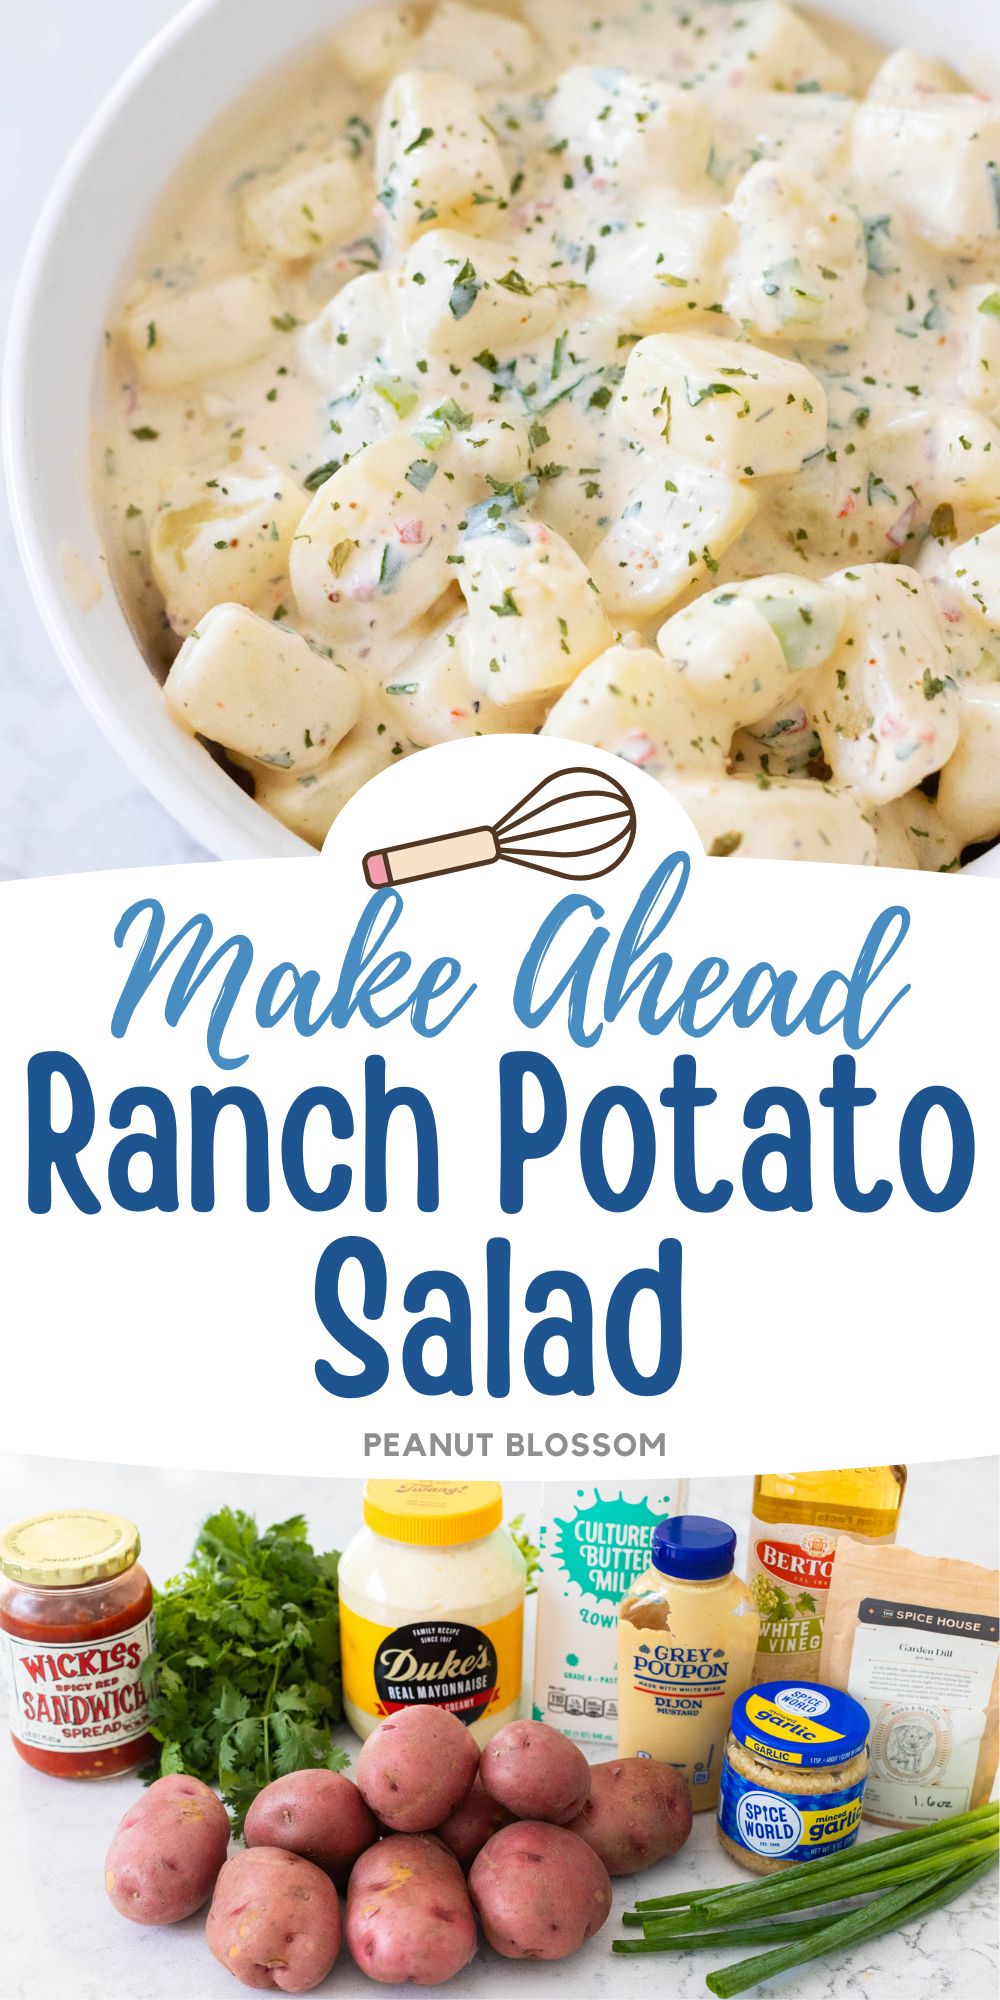 The finish potato salad is shown next to a photo of the ingredients used to make it.